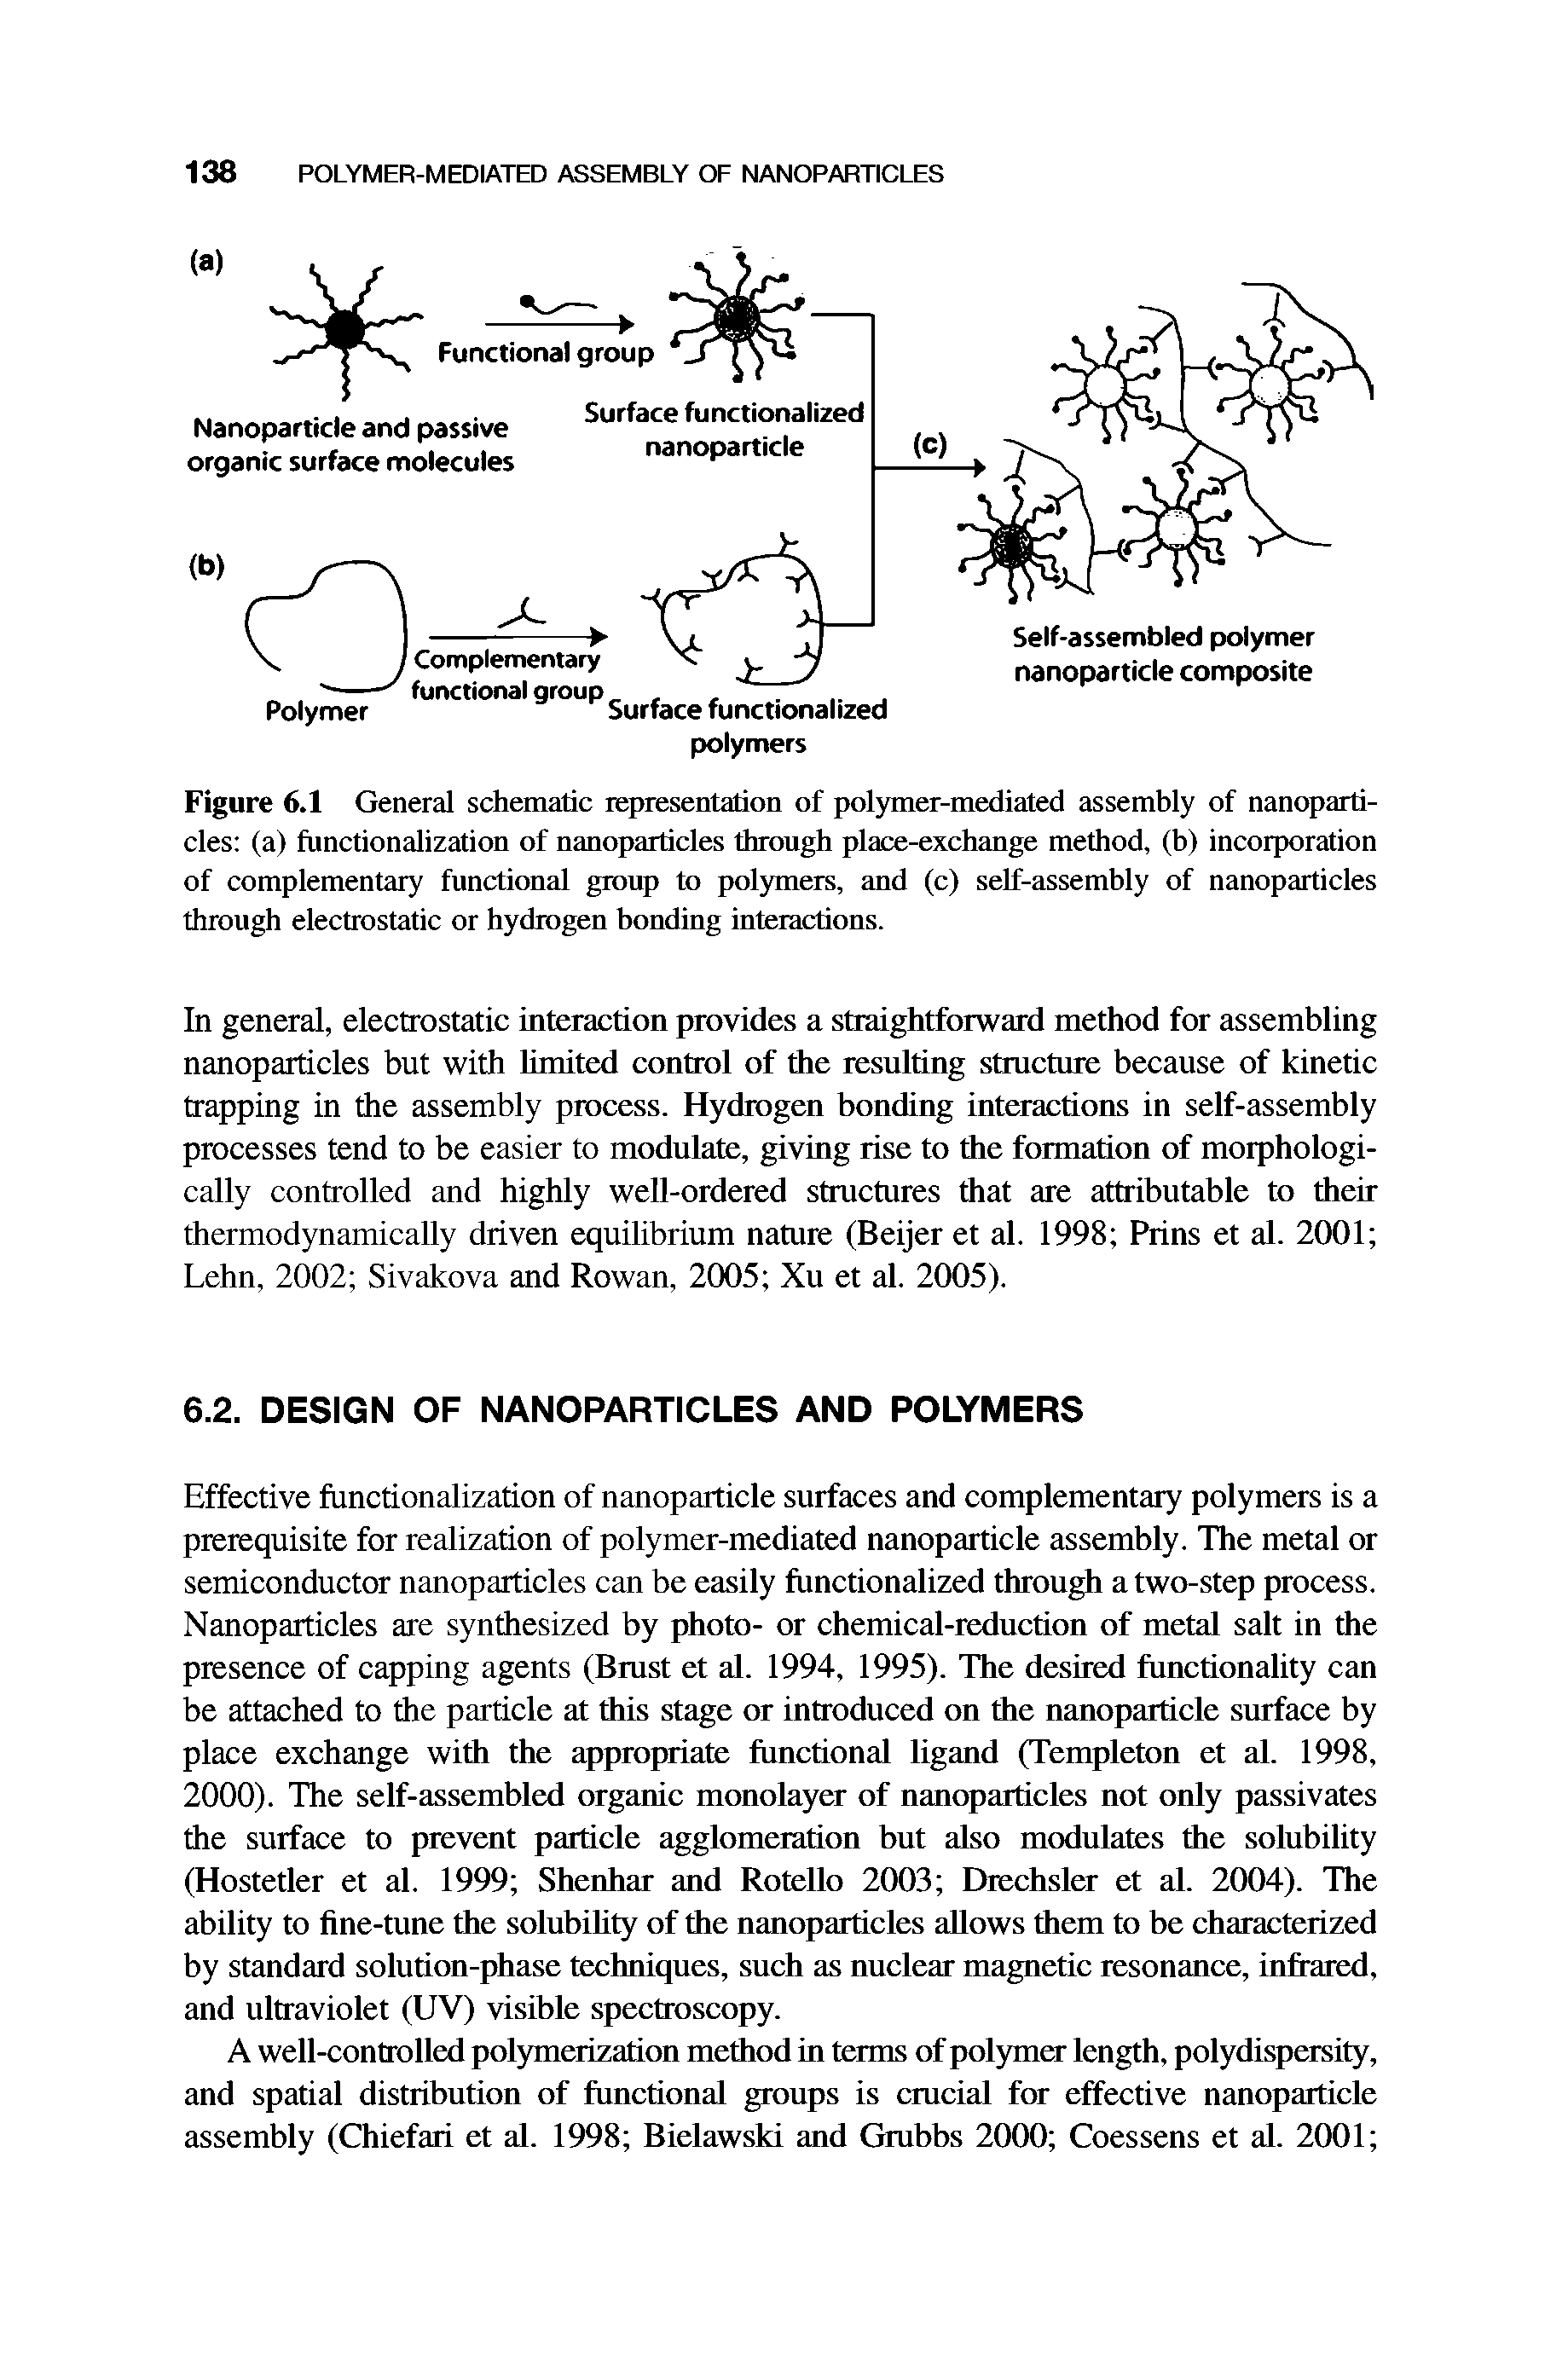 Figure 6.1 General schematic representation of pol3mier-mediated assembly of nanoparticles (a) functionalization of nanoparticles through place-exchange method, (b) incorporation of complementary functional group to pol3miers, and (c) self-assembly of nanoparticles through electrostatic or hydrogen bonding interactions.